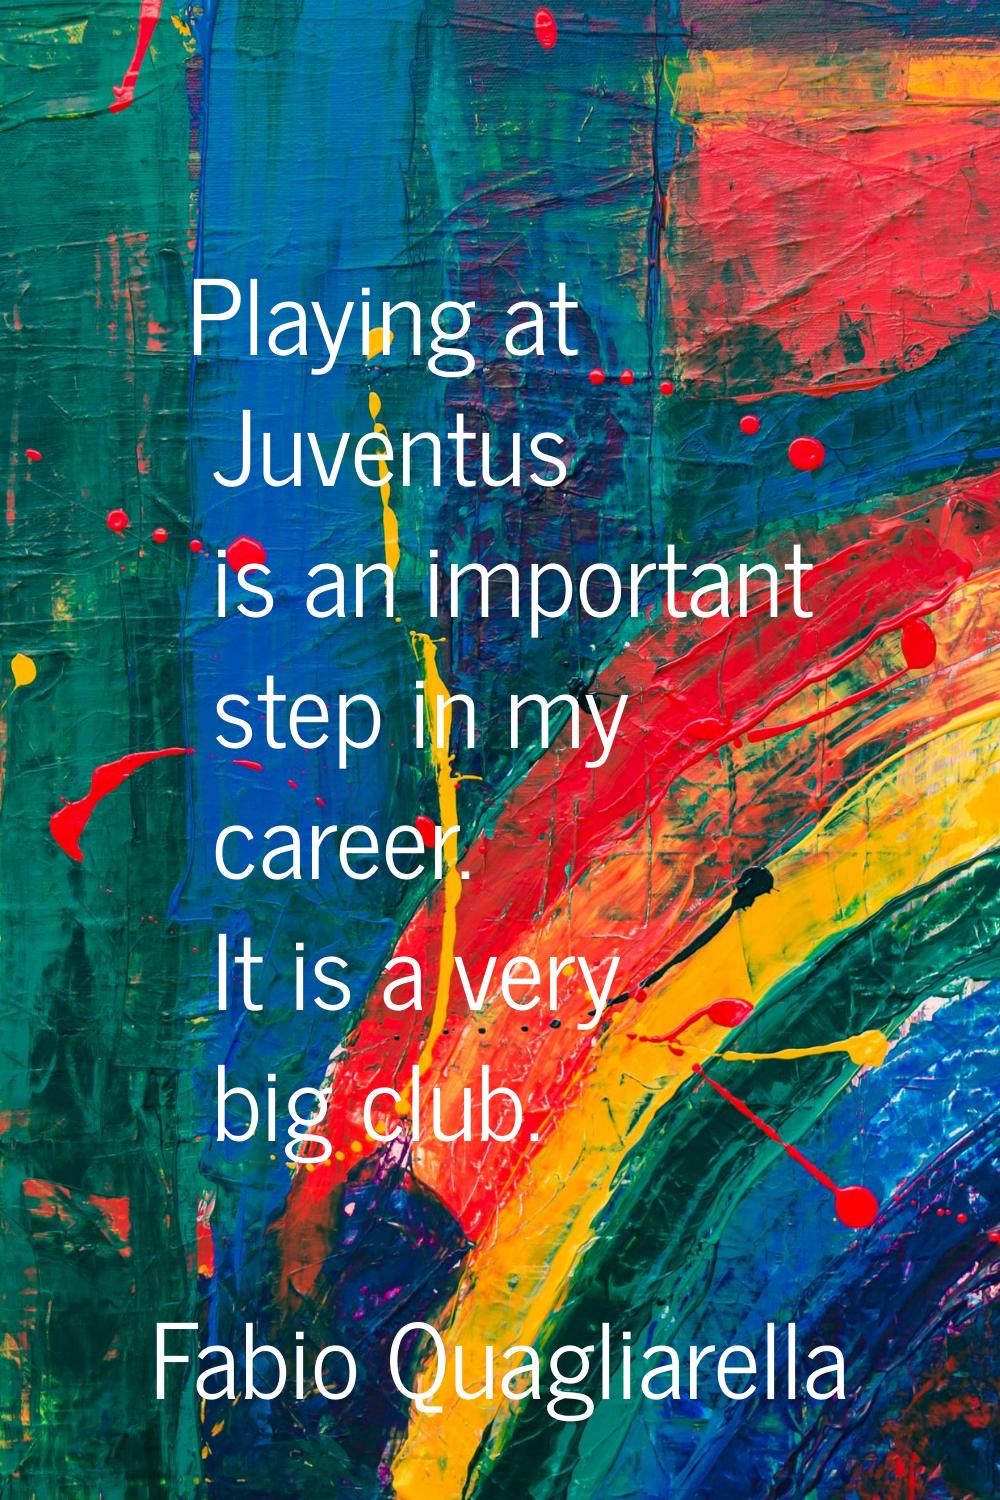 Playing at Juventus is an important step in my career. It is a very big club.